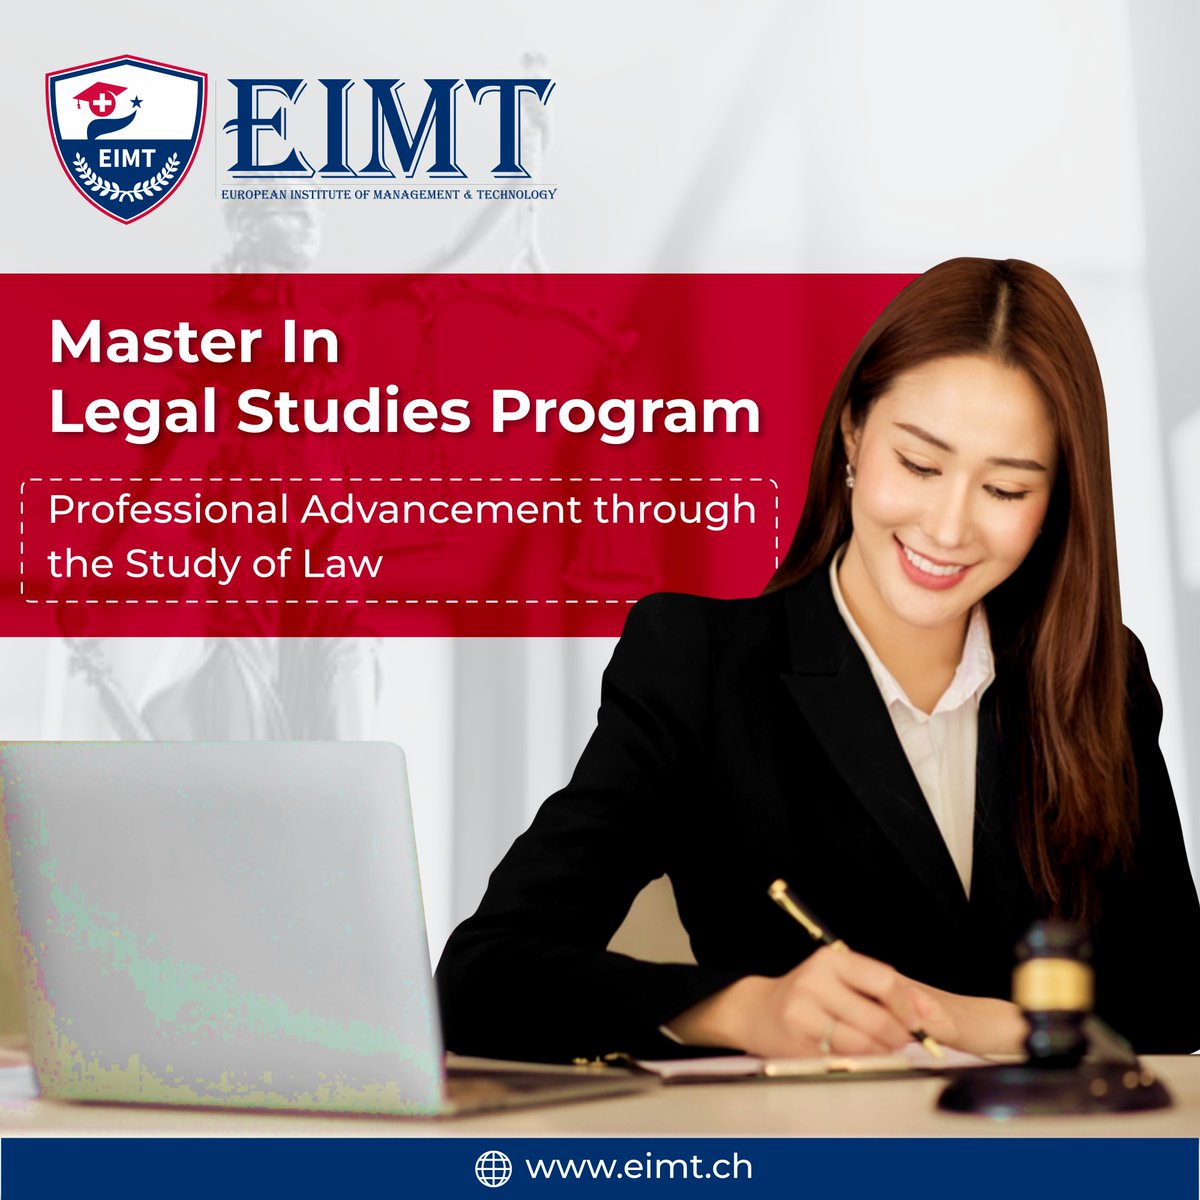 Our MLS degree will assist you in gaining these particular legal skills and knowledge so that you may prepare for future leadership and management responsibilities.

#EIMT #lawgraduate #masters #litigation #law #mastersoflaw #admission #lawstudentlife #courses #careerdevelopment